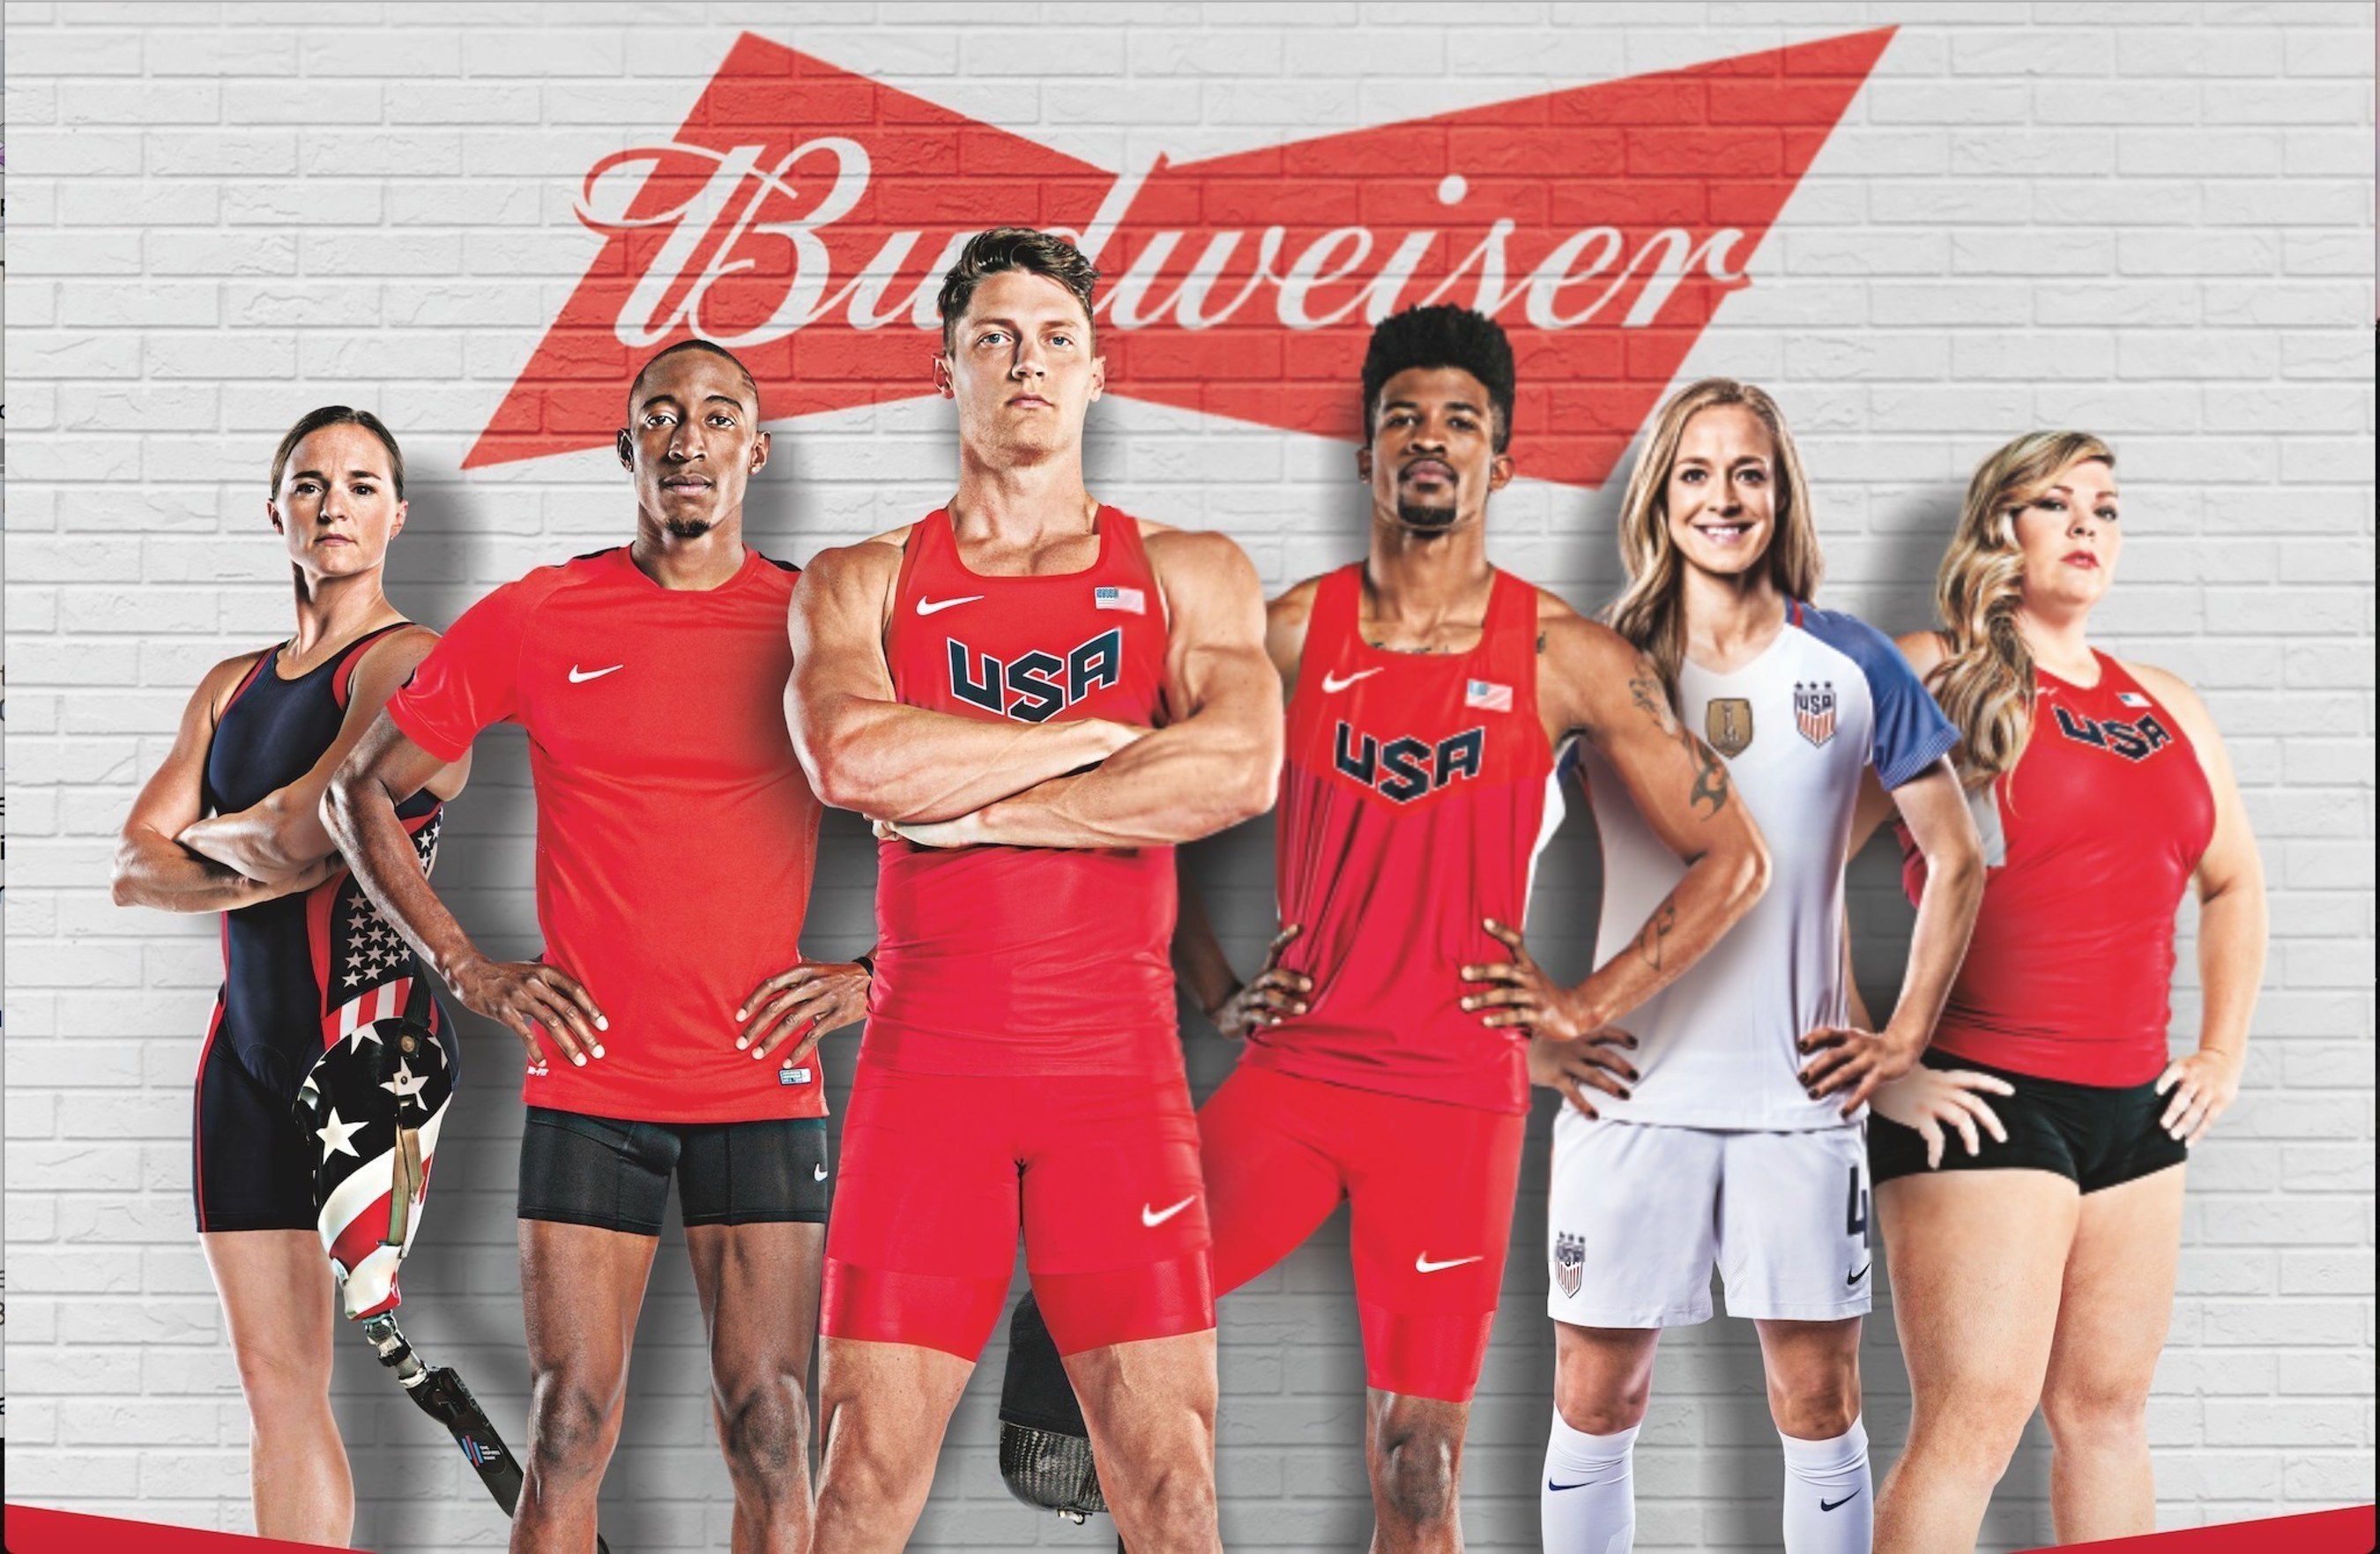 Budweiser Joins Forces with Six Elite Athletes to Support their Journeys to the 2016 Olympic Games in Rio de Janeiro